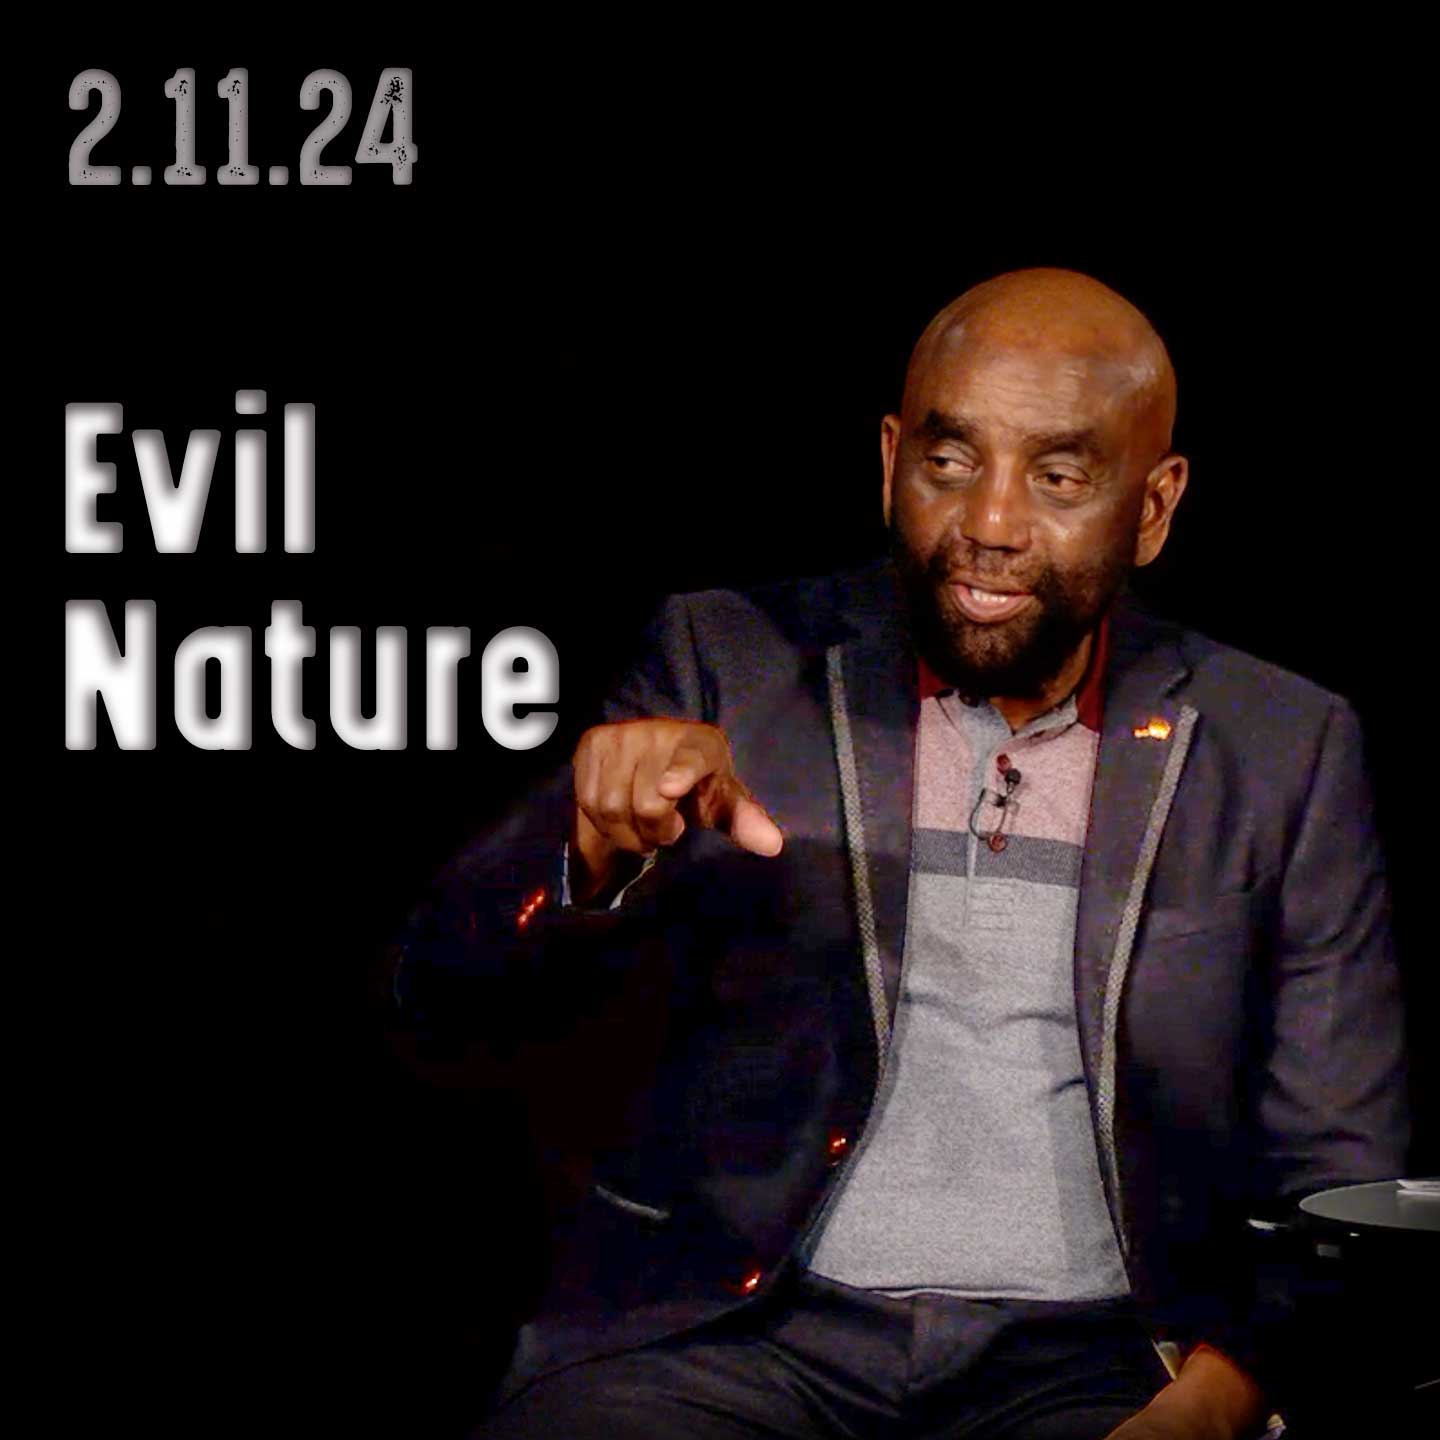 Do you know you're evil? Church 2-11-24 (Evil nature)